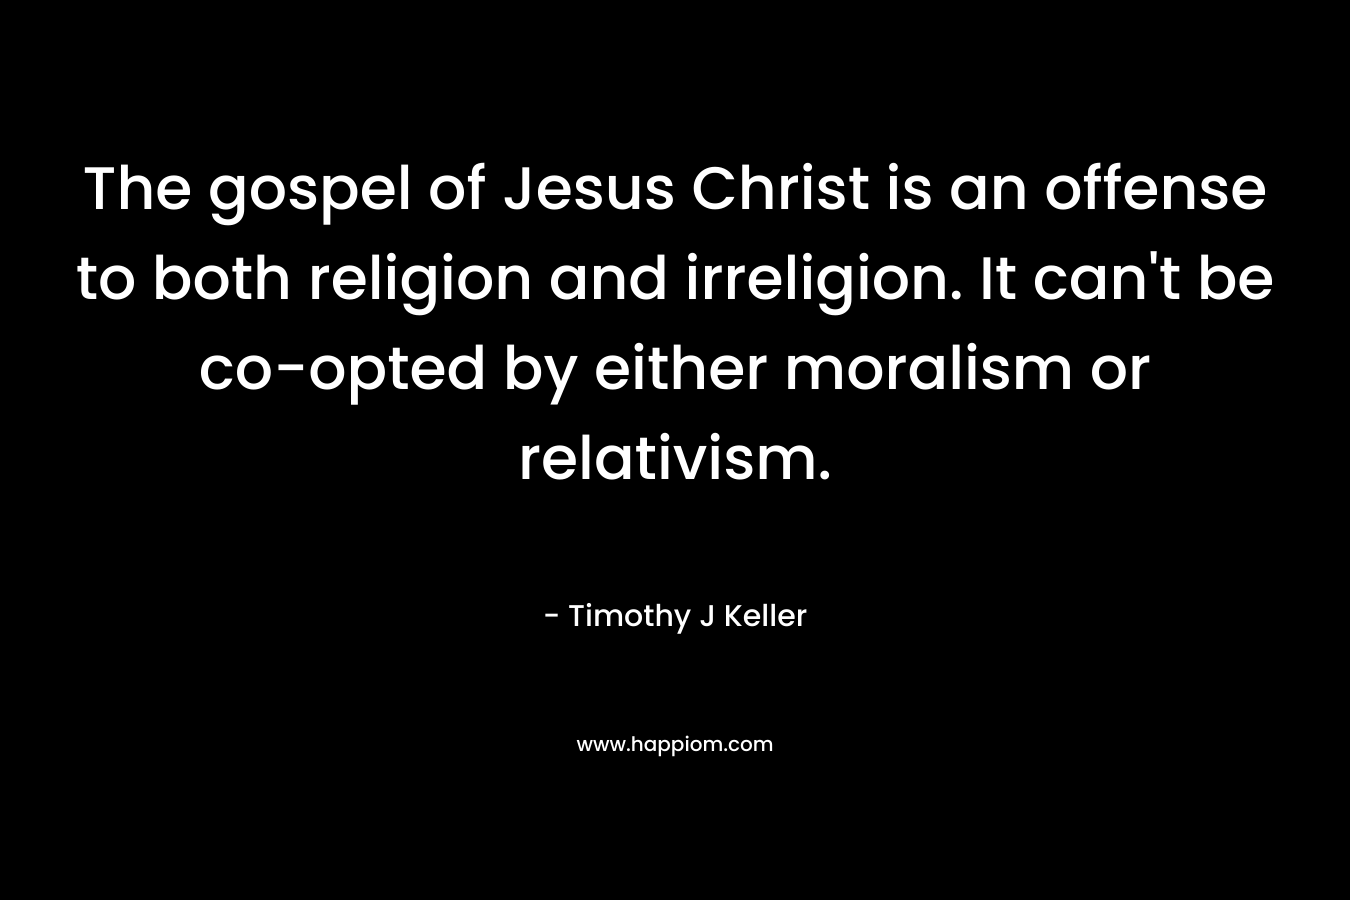 The gospel of Jesus Christ is an offense to both religion and irreligion. It can’t be co-opted by either moralism or relativism. – Timothy J Keller